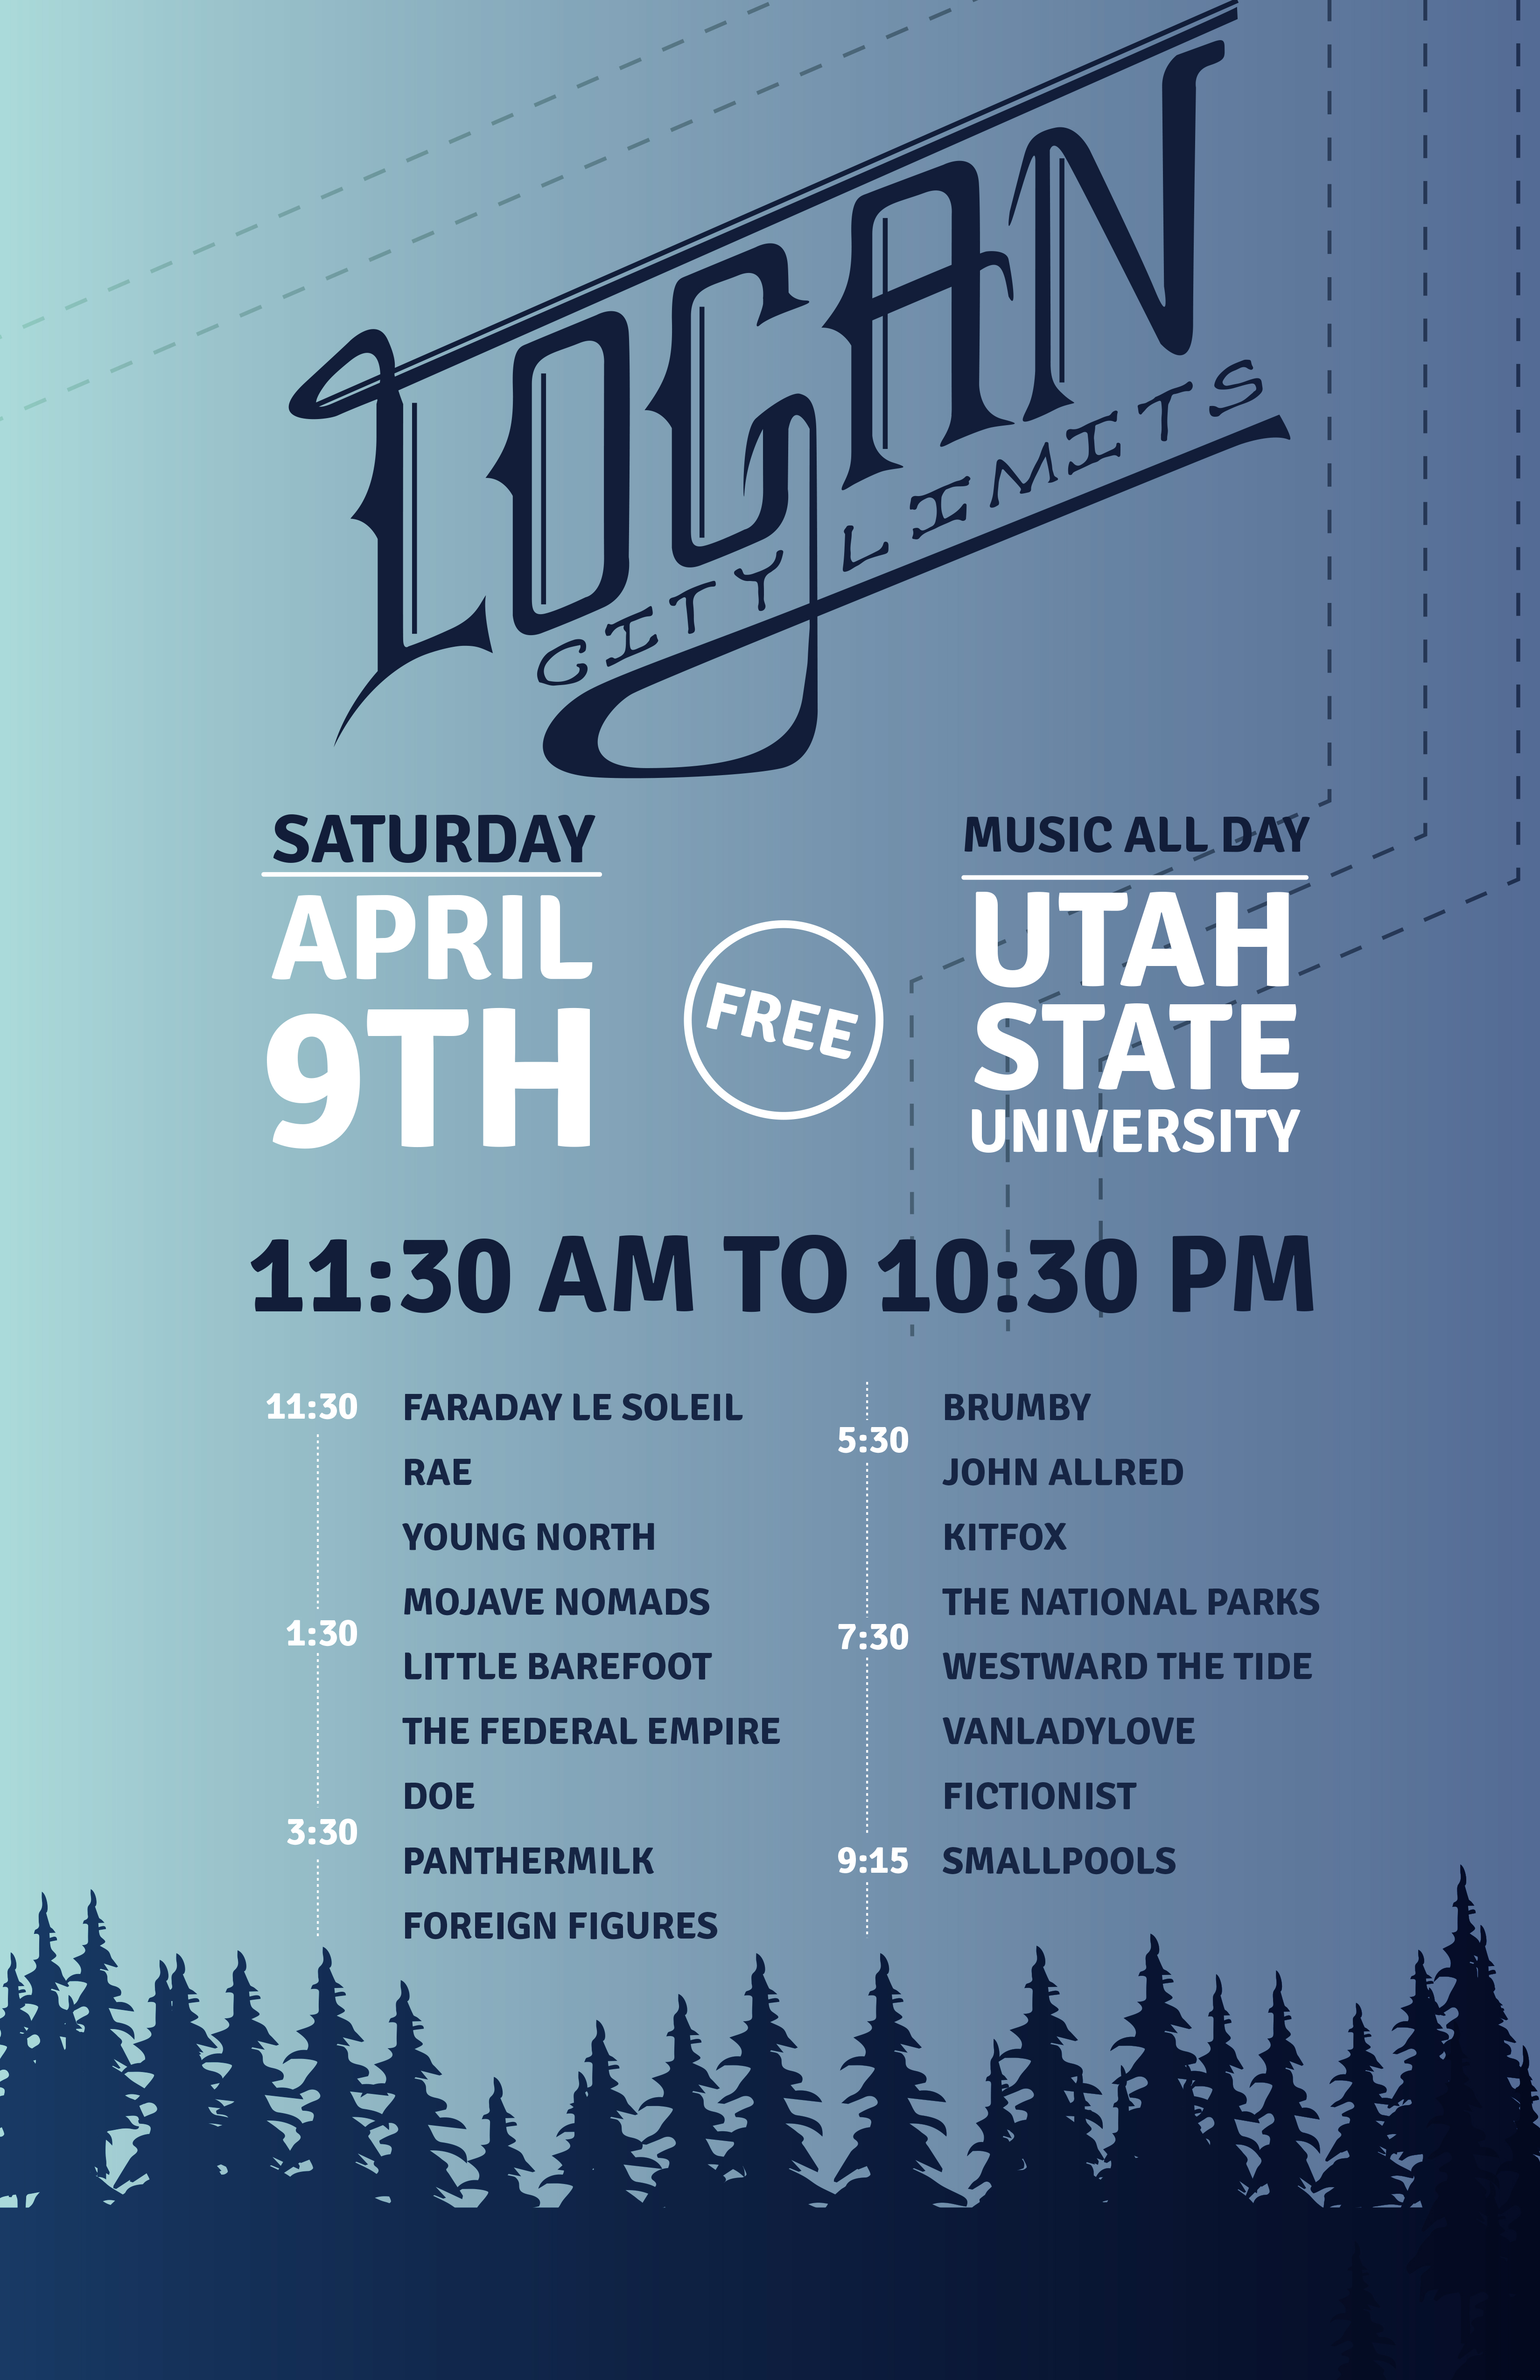 Logan City Limits Music Festival featuring Smallpools, The National Parks, Westward the Tide and many local bands from Utah, Las Vegas and California. Utah State University April 9th, 2016.